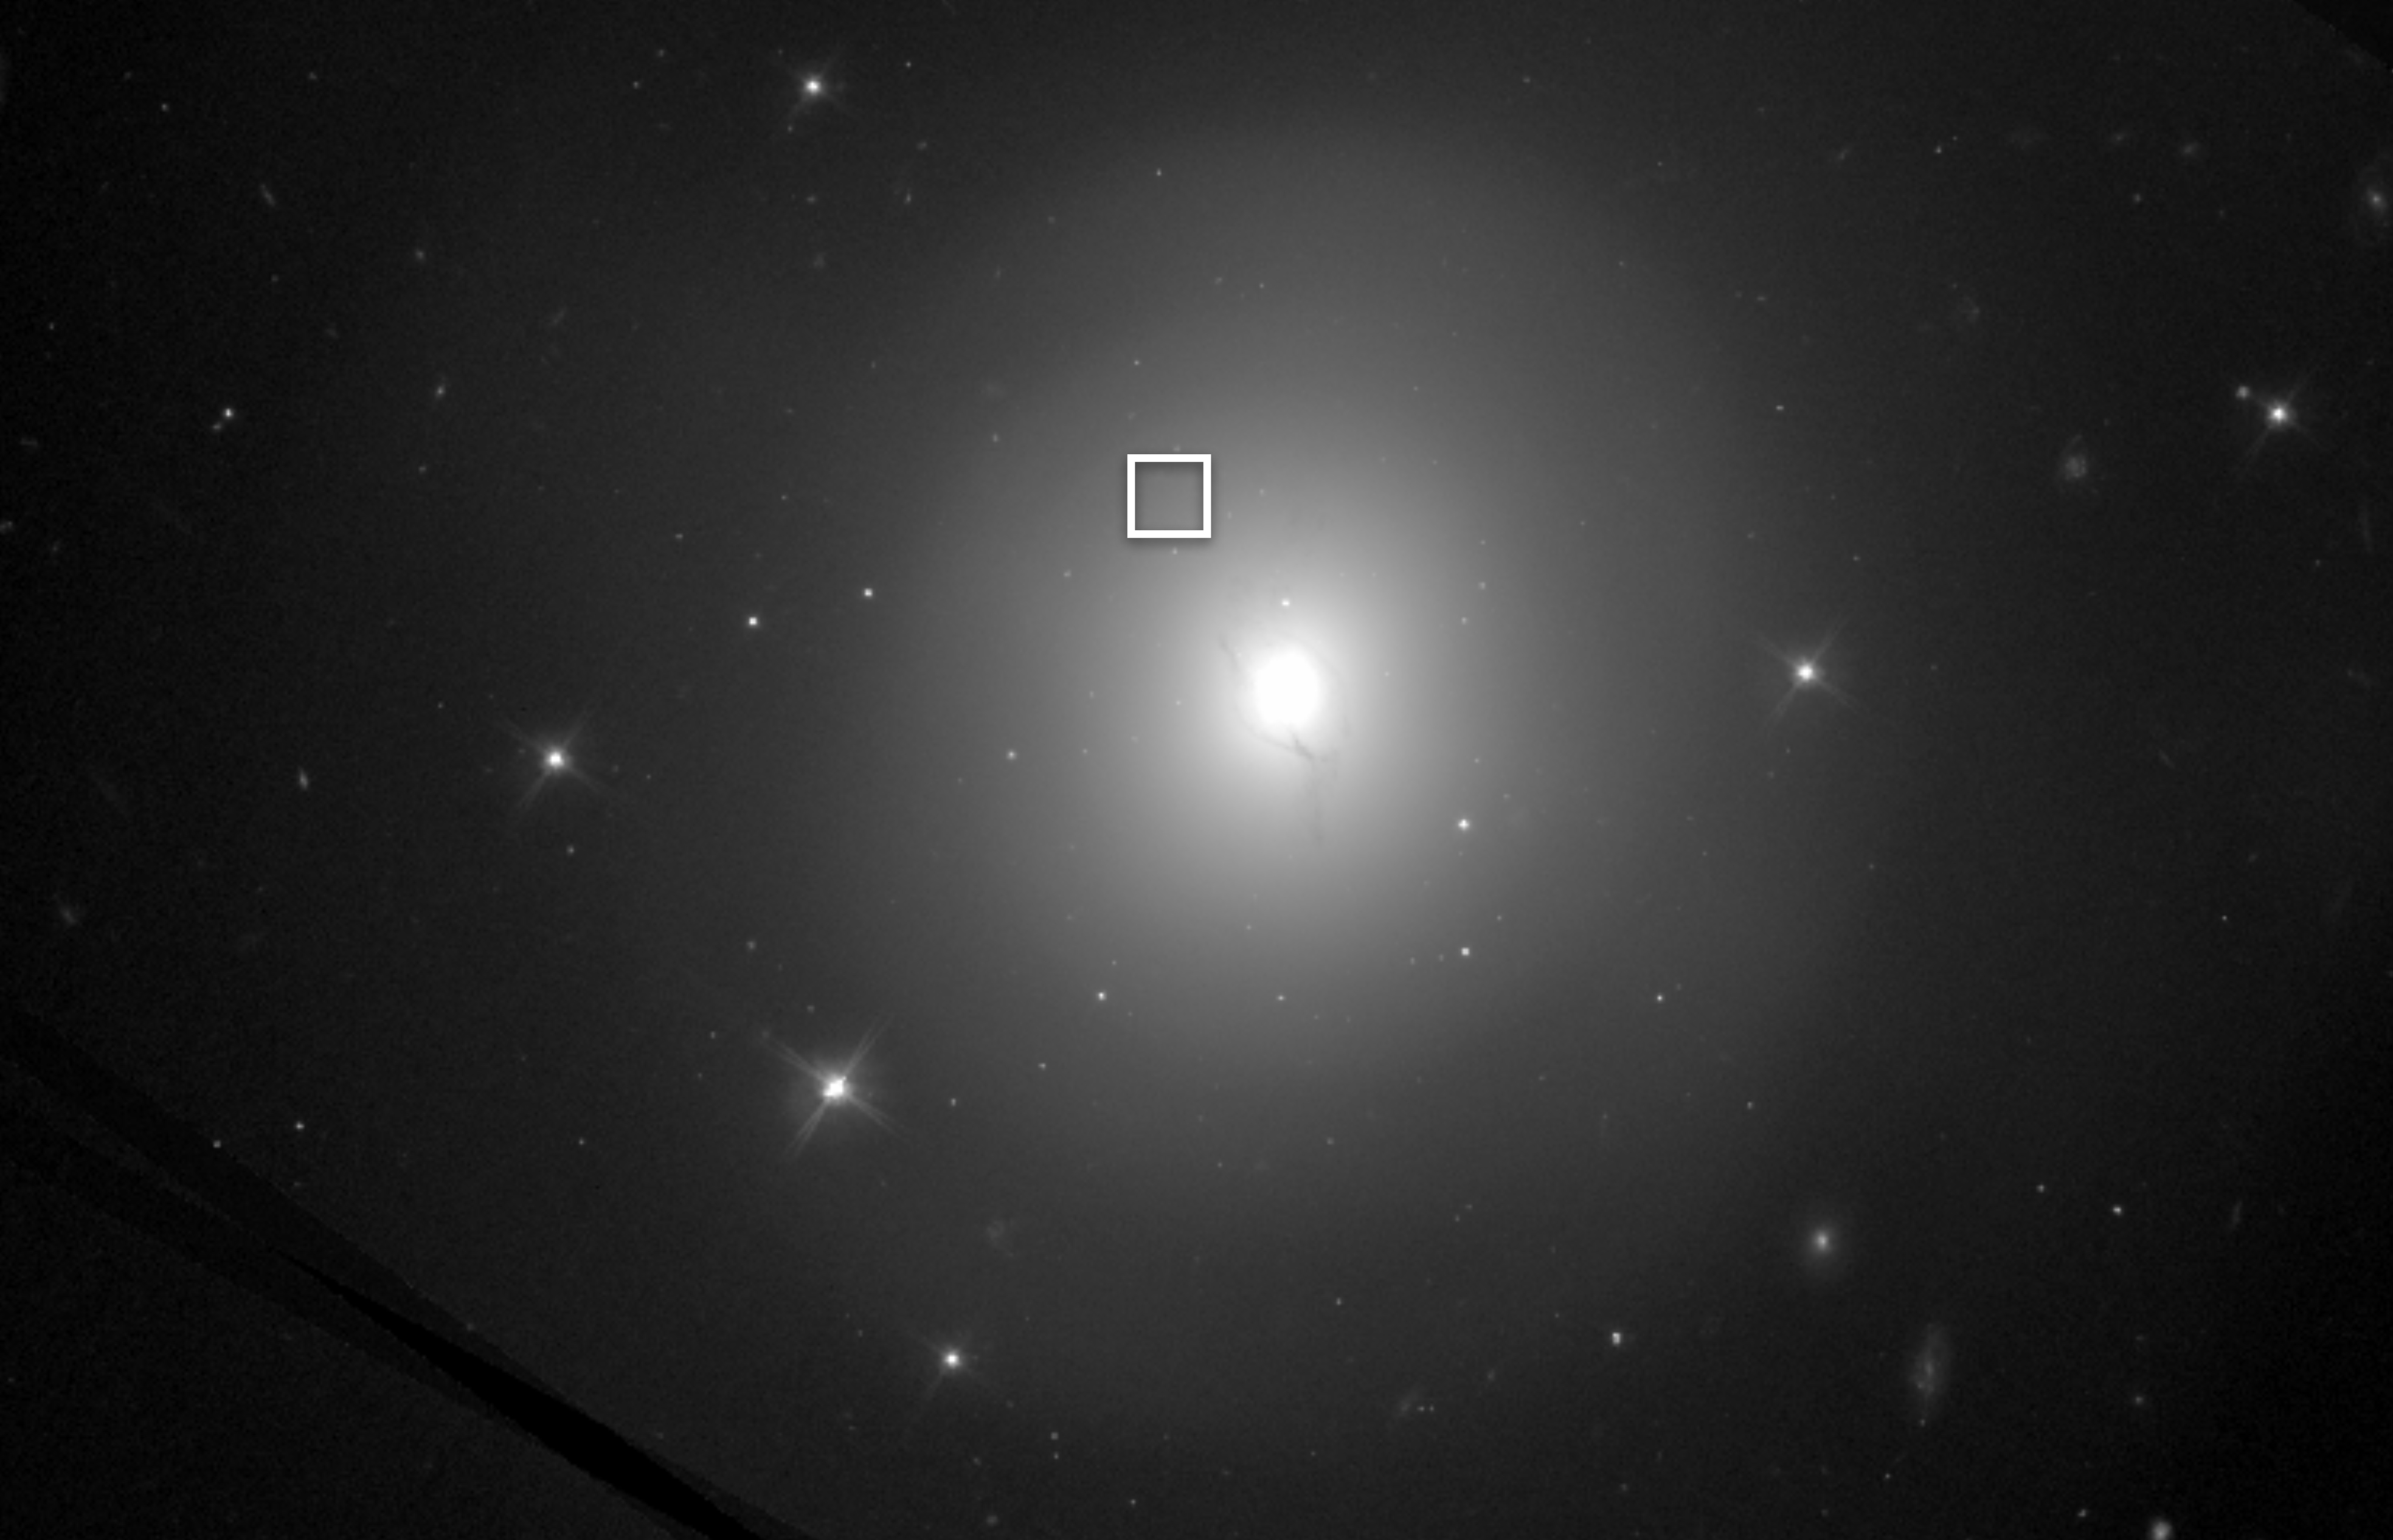 New Hubble Image Reveals Never Before Seen Details Of Neutron Star